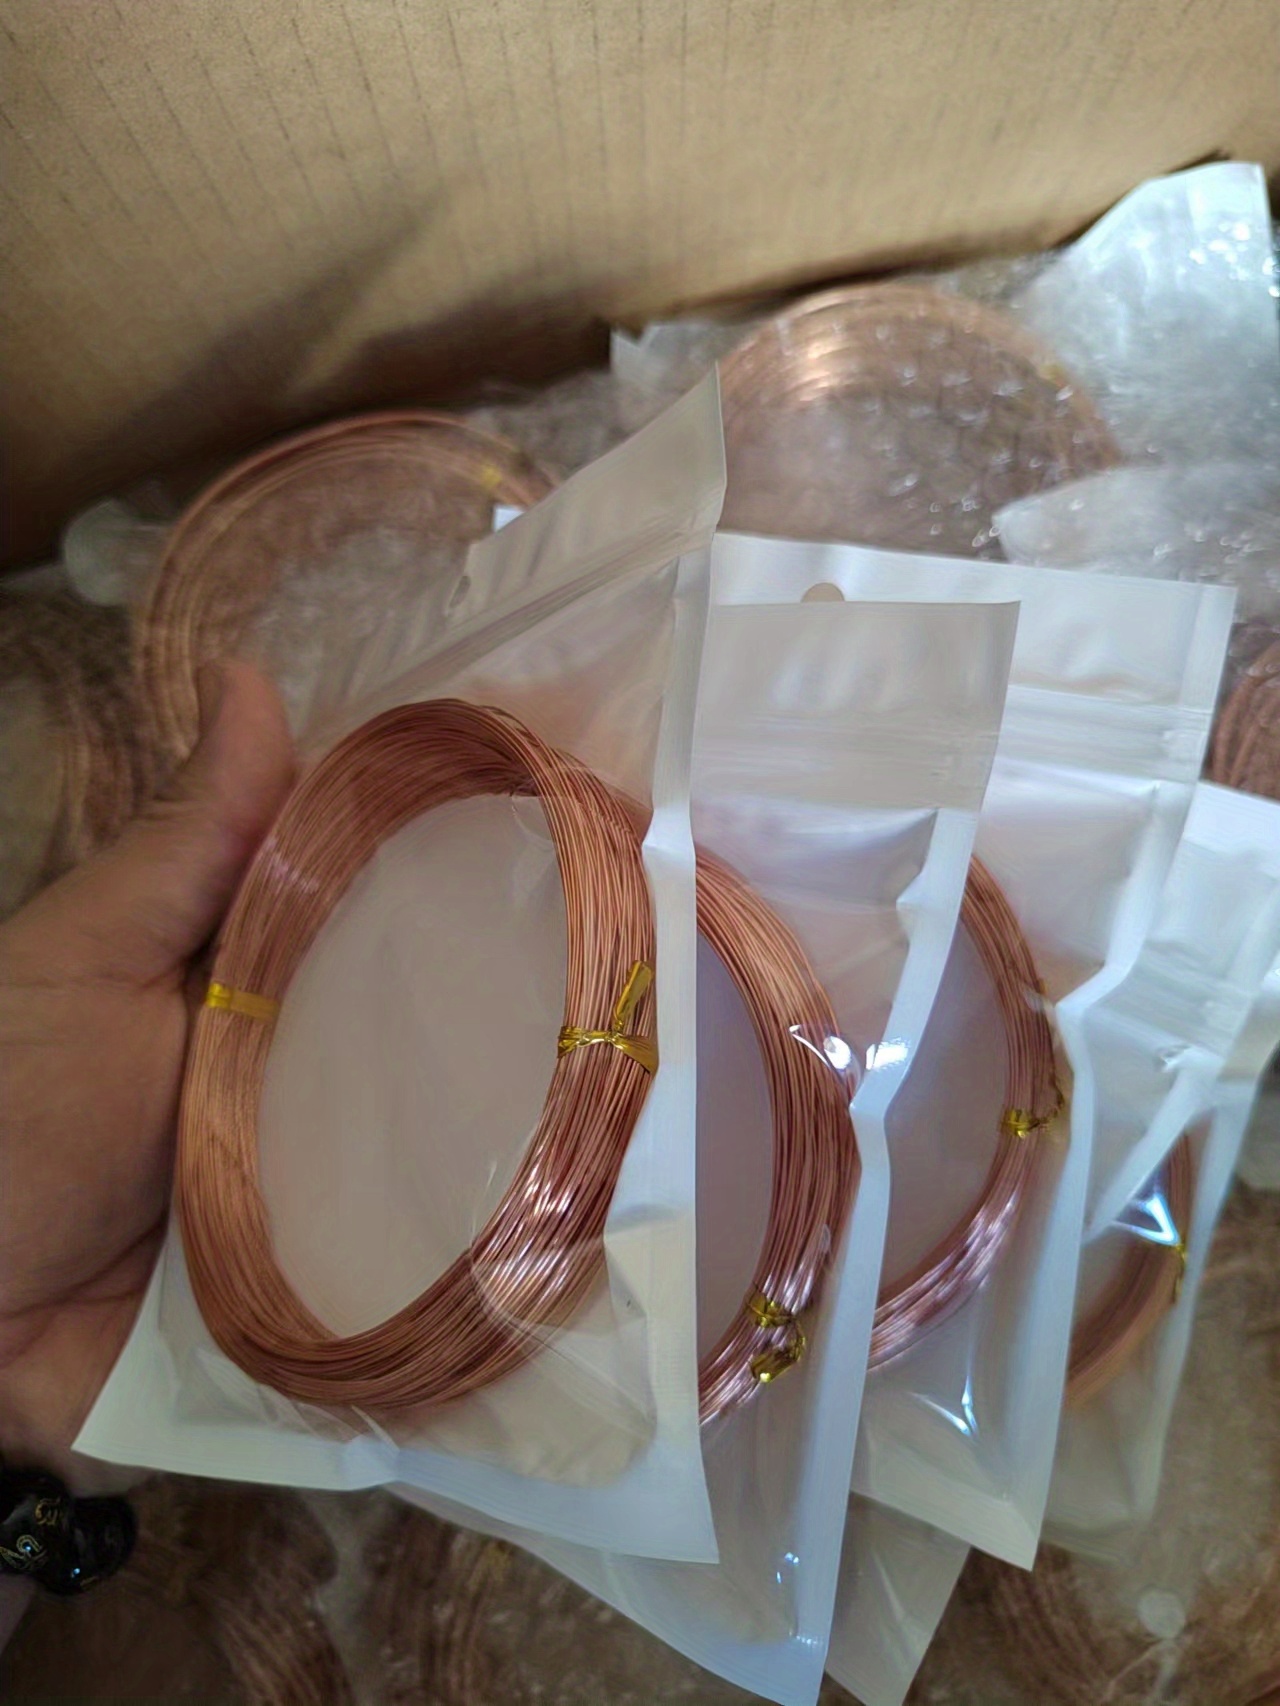 99% Copper Wire - 19 Gauge, 1.0mm - Rust Resistant - Perfect for Jewelry  Making, Crafts & Floral Decoration!